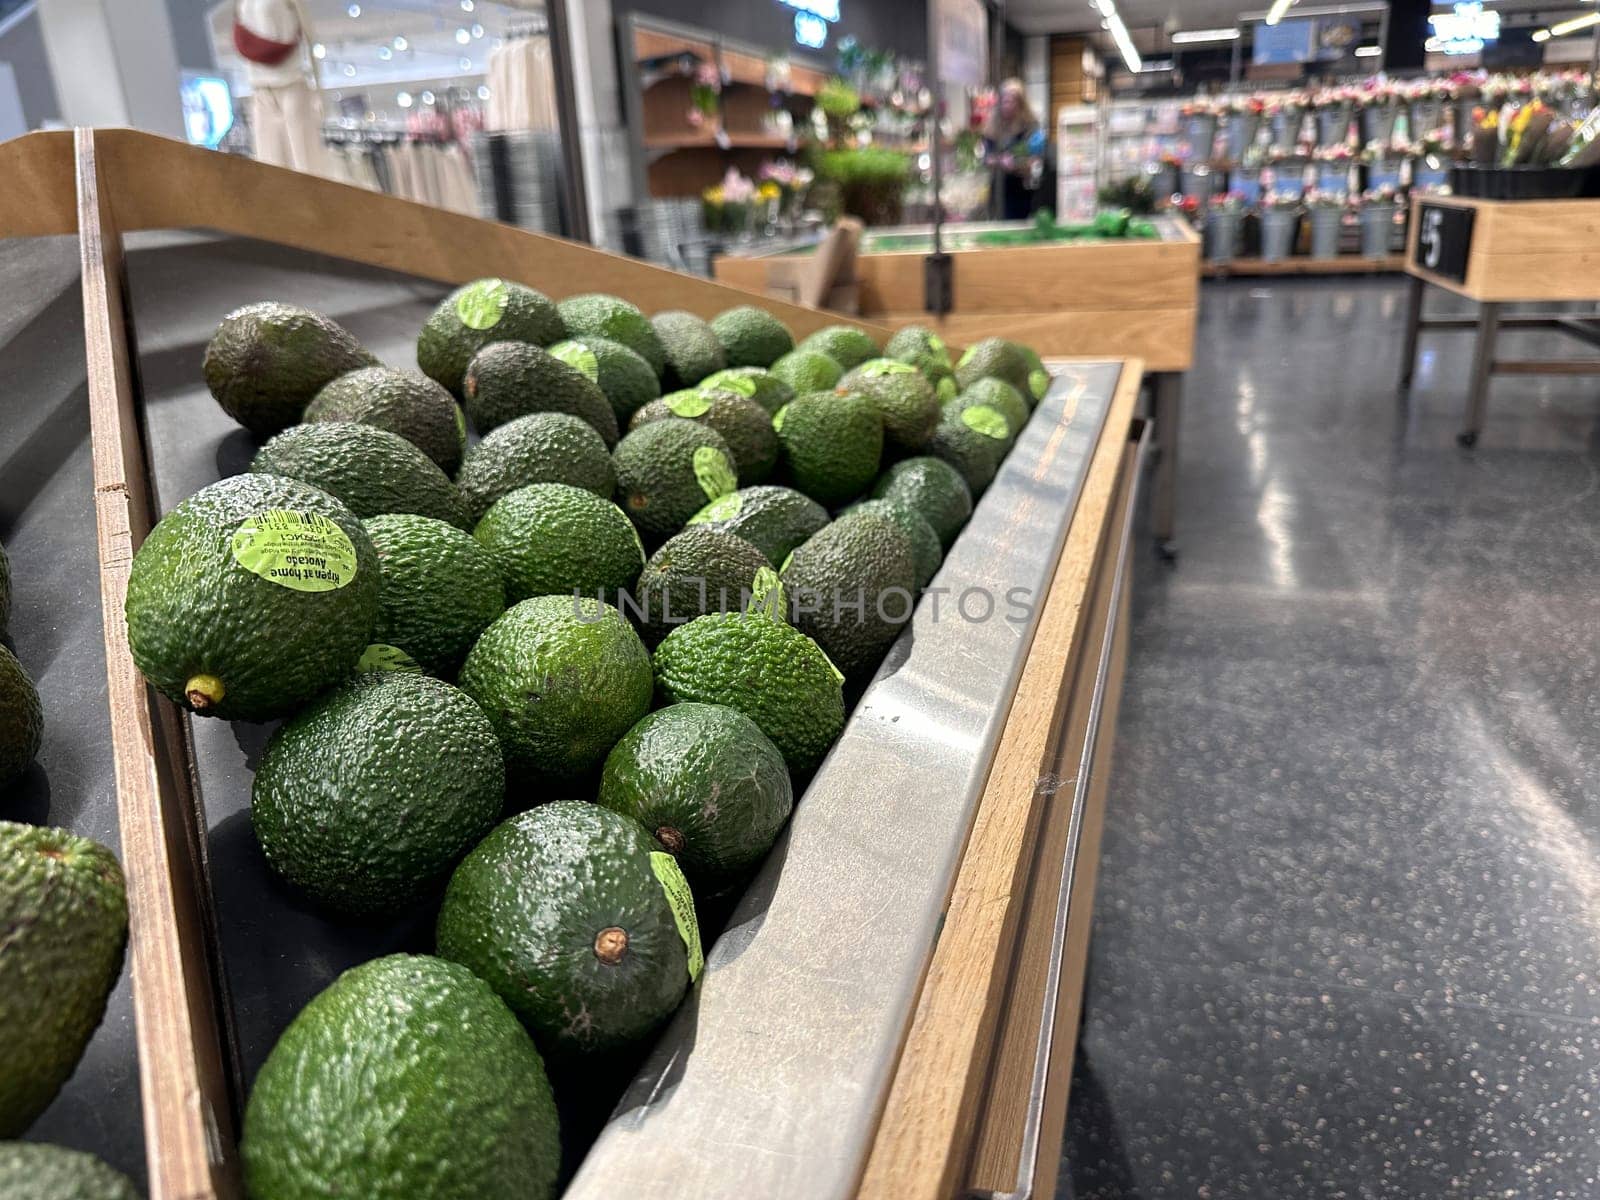 Green avocados for sale at supermarket